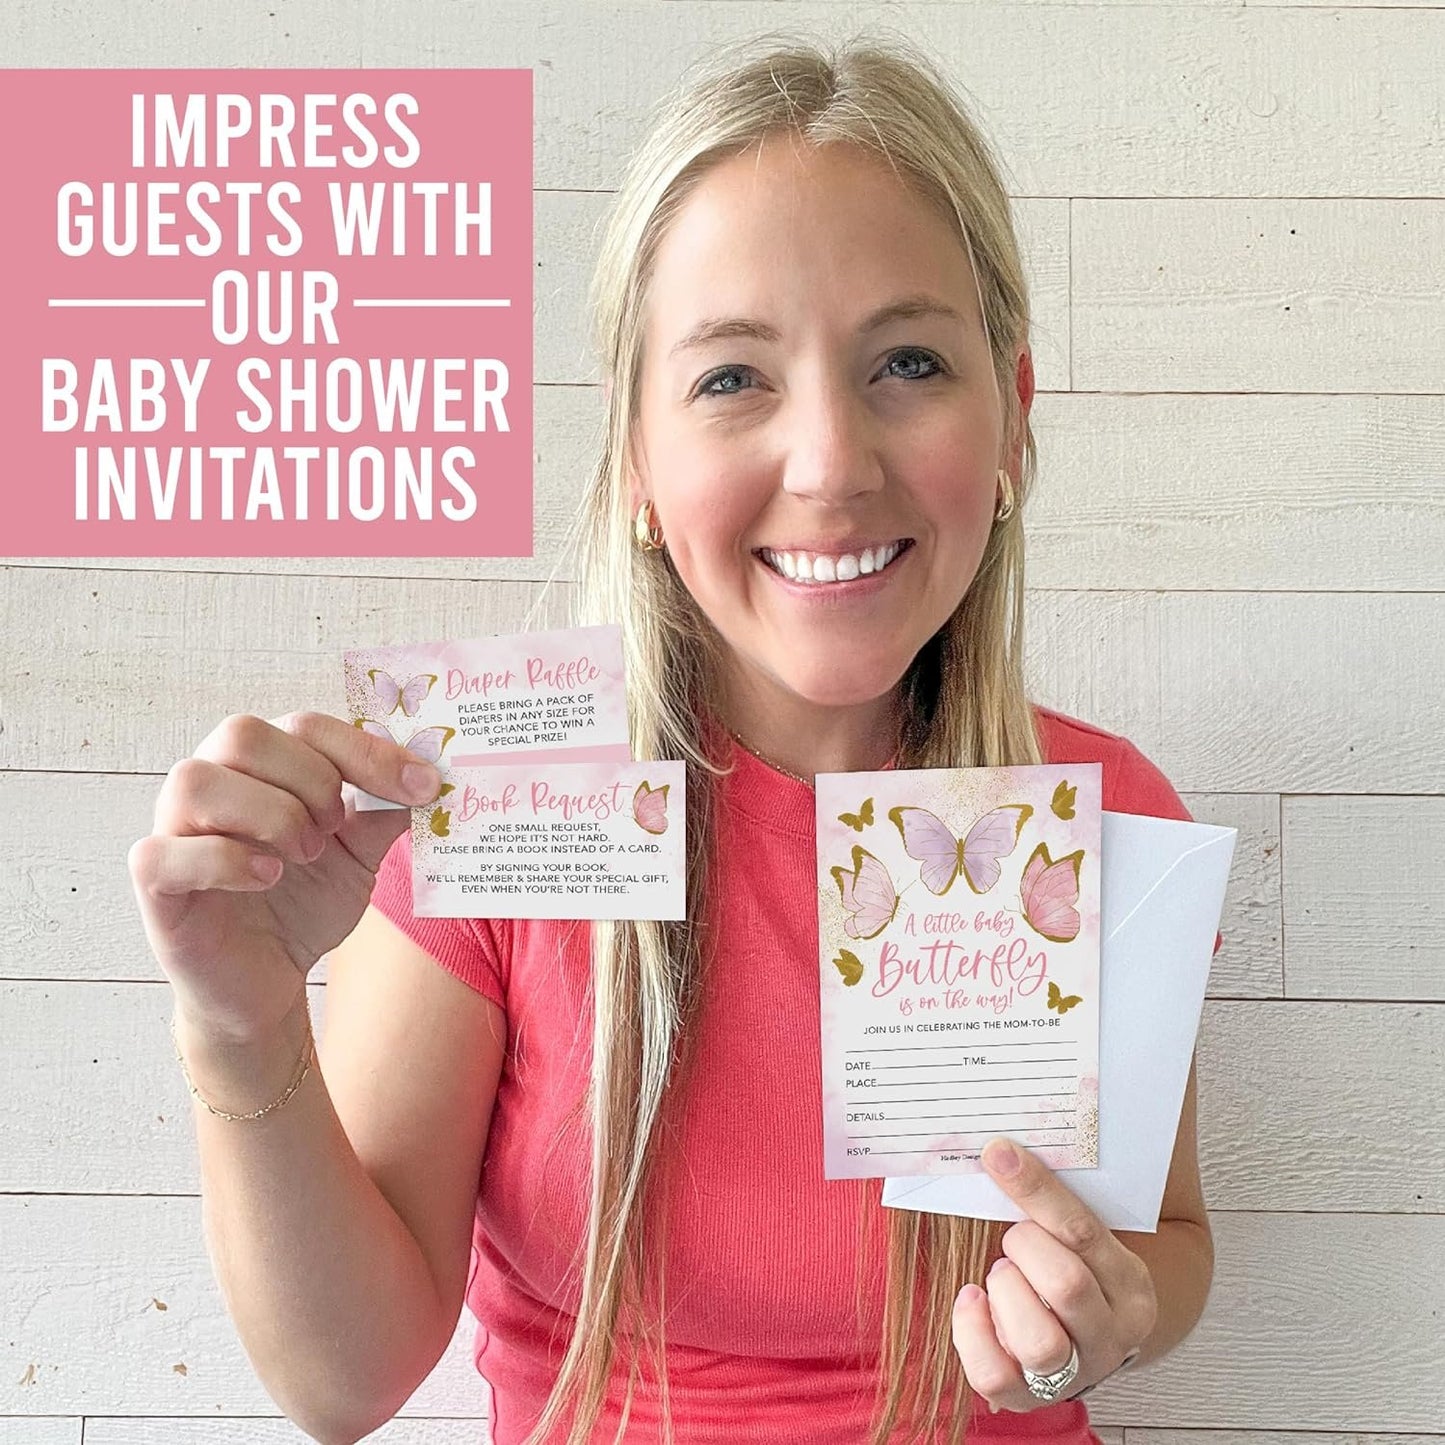 15 Butterfly Baby Shower Invitations For Girl - Baby Girl Baby Shower Invites For Girl Baby Shower Invitations, Baby Girl Shower Invitations, Invitations For Baby Shower Girl, Baby Invitations